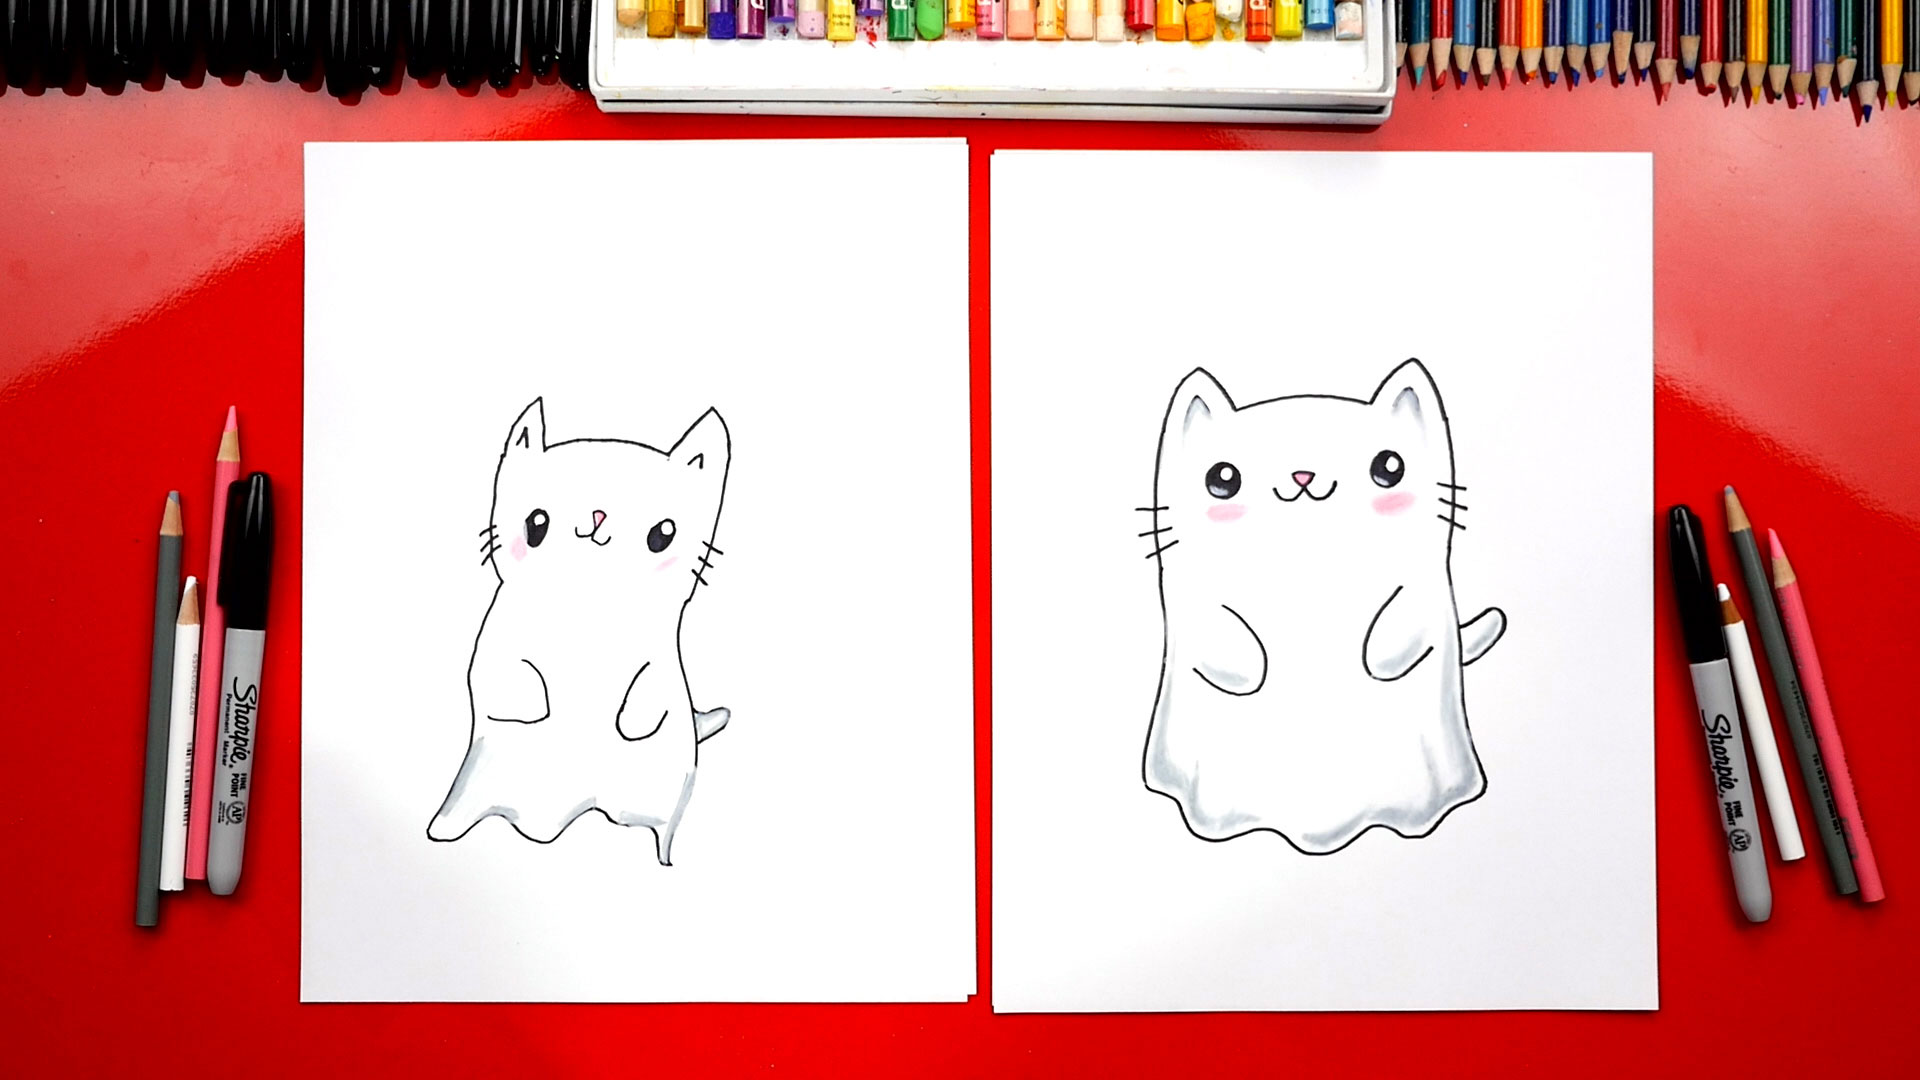 New Lessons! How to draw a Halloween - Art for Kids Hub